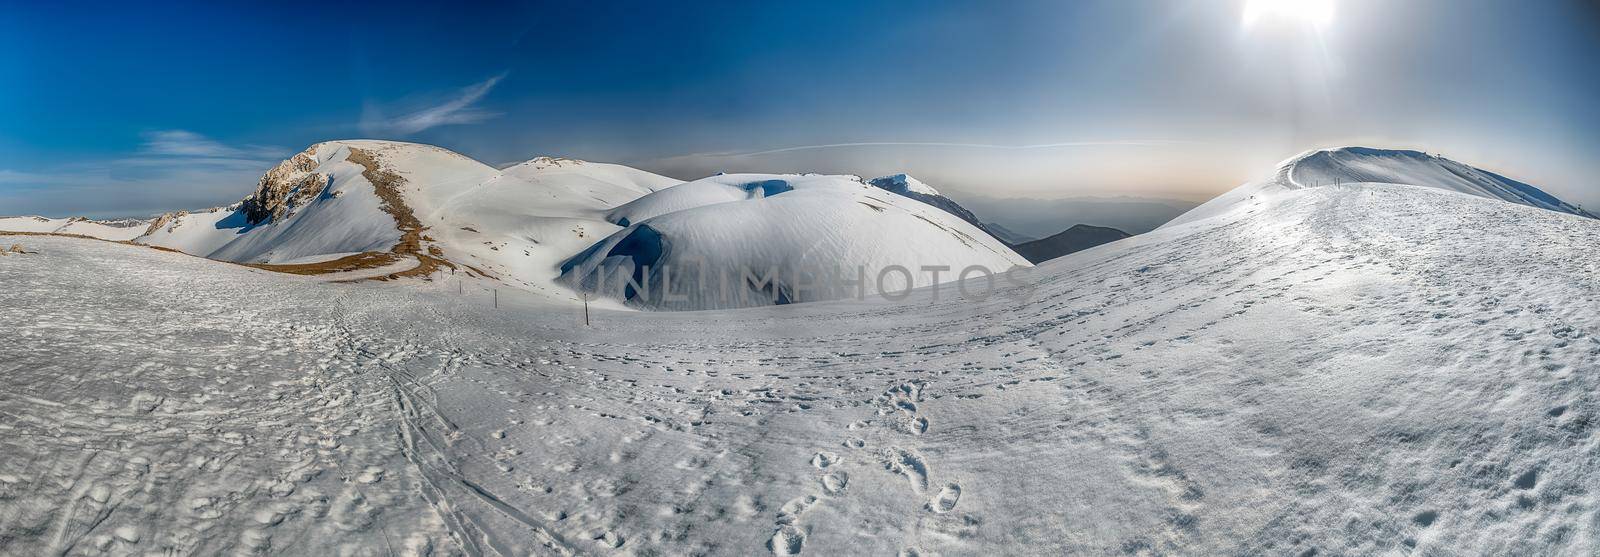 Scenic winter landscape with snow covered mountains, Campocatino, Italy by marcorubino